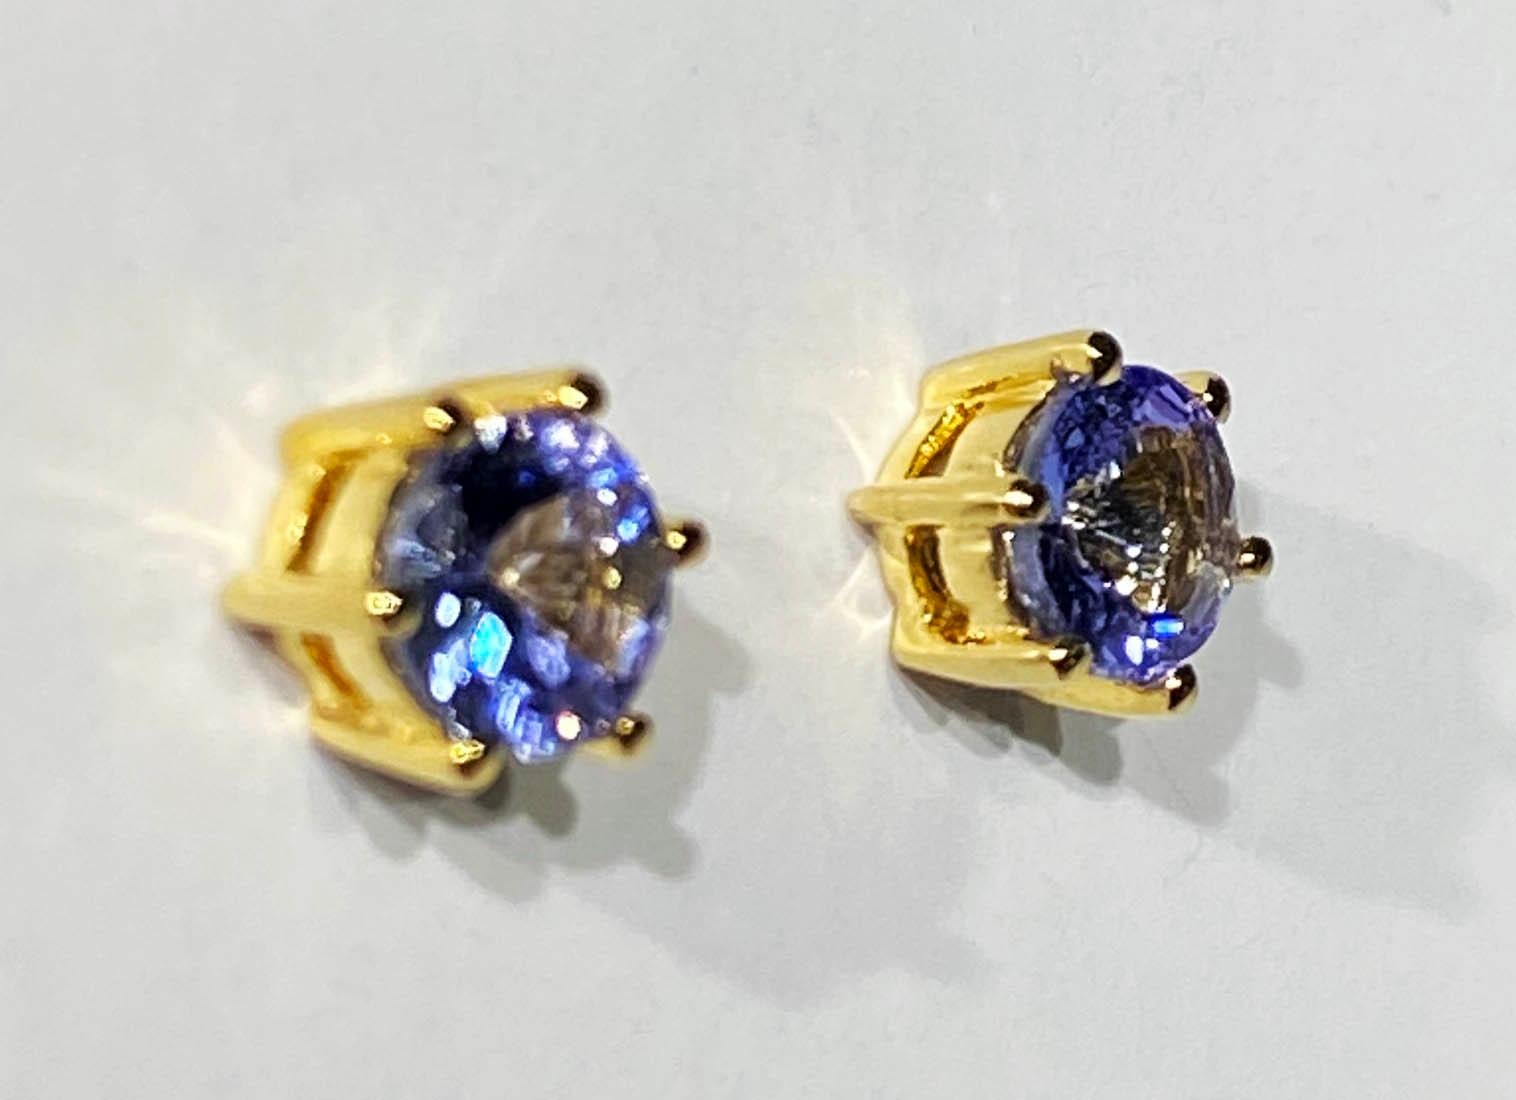 Brilliant Cut Tanzanite Stud Earrings set in 14kt Yellow Gold For Sale